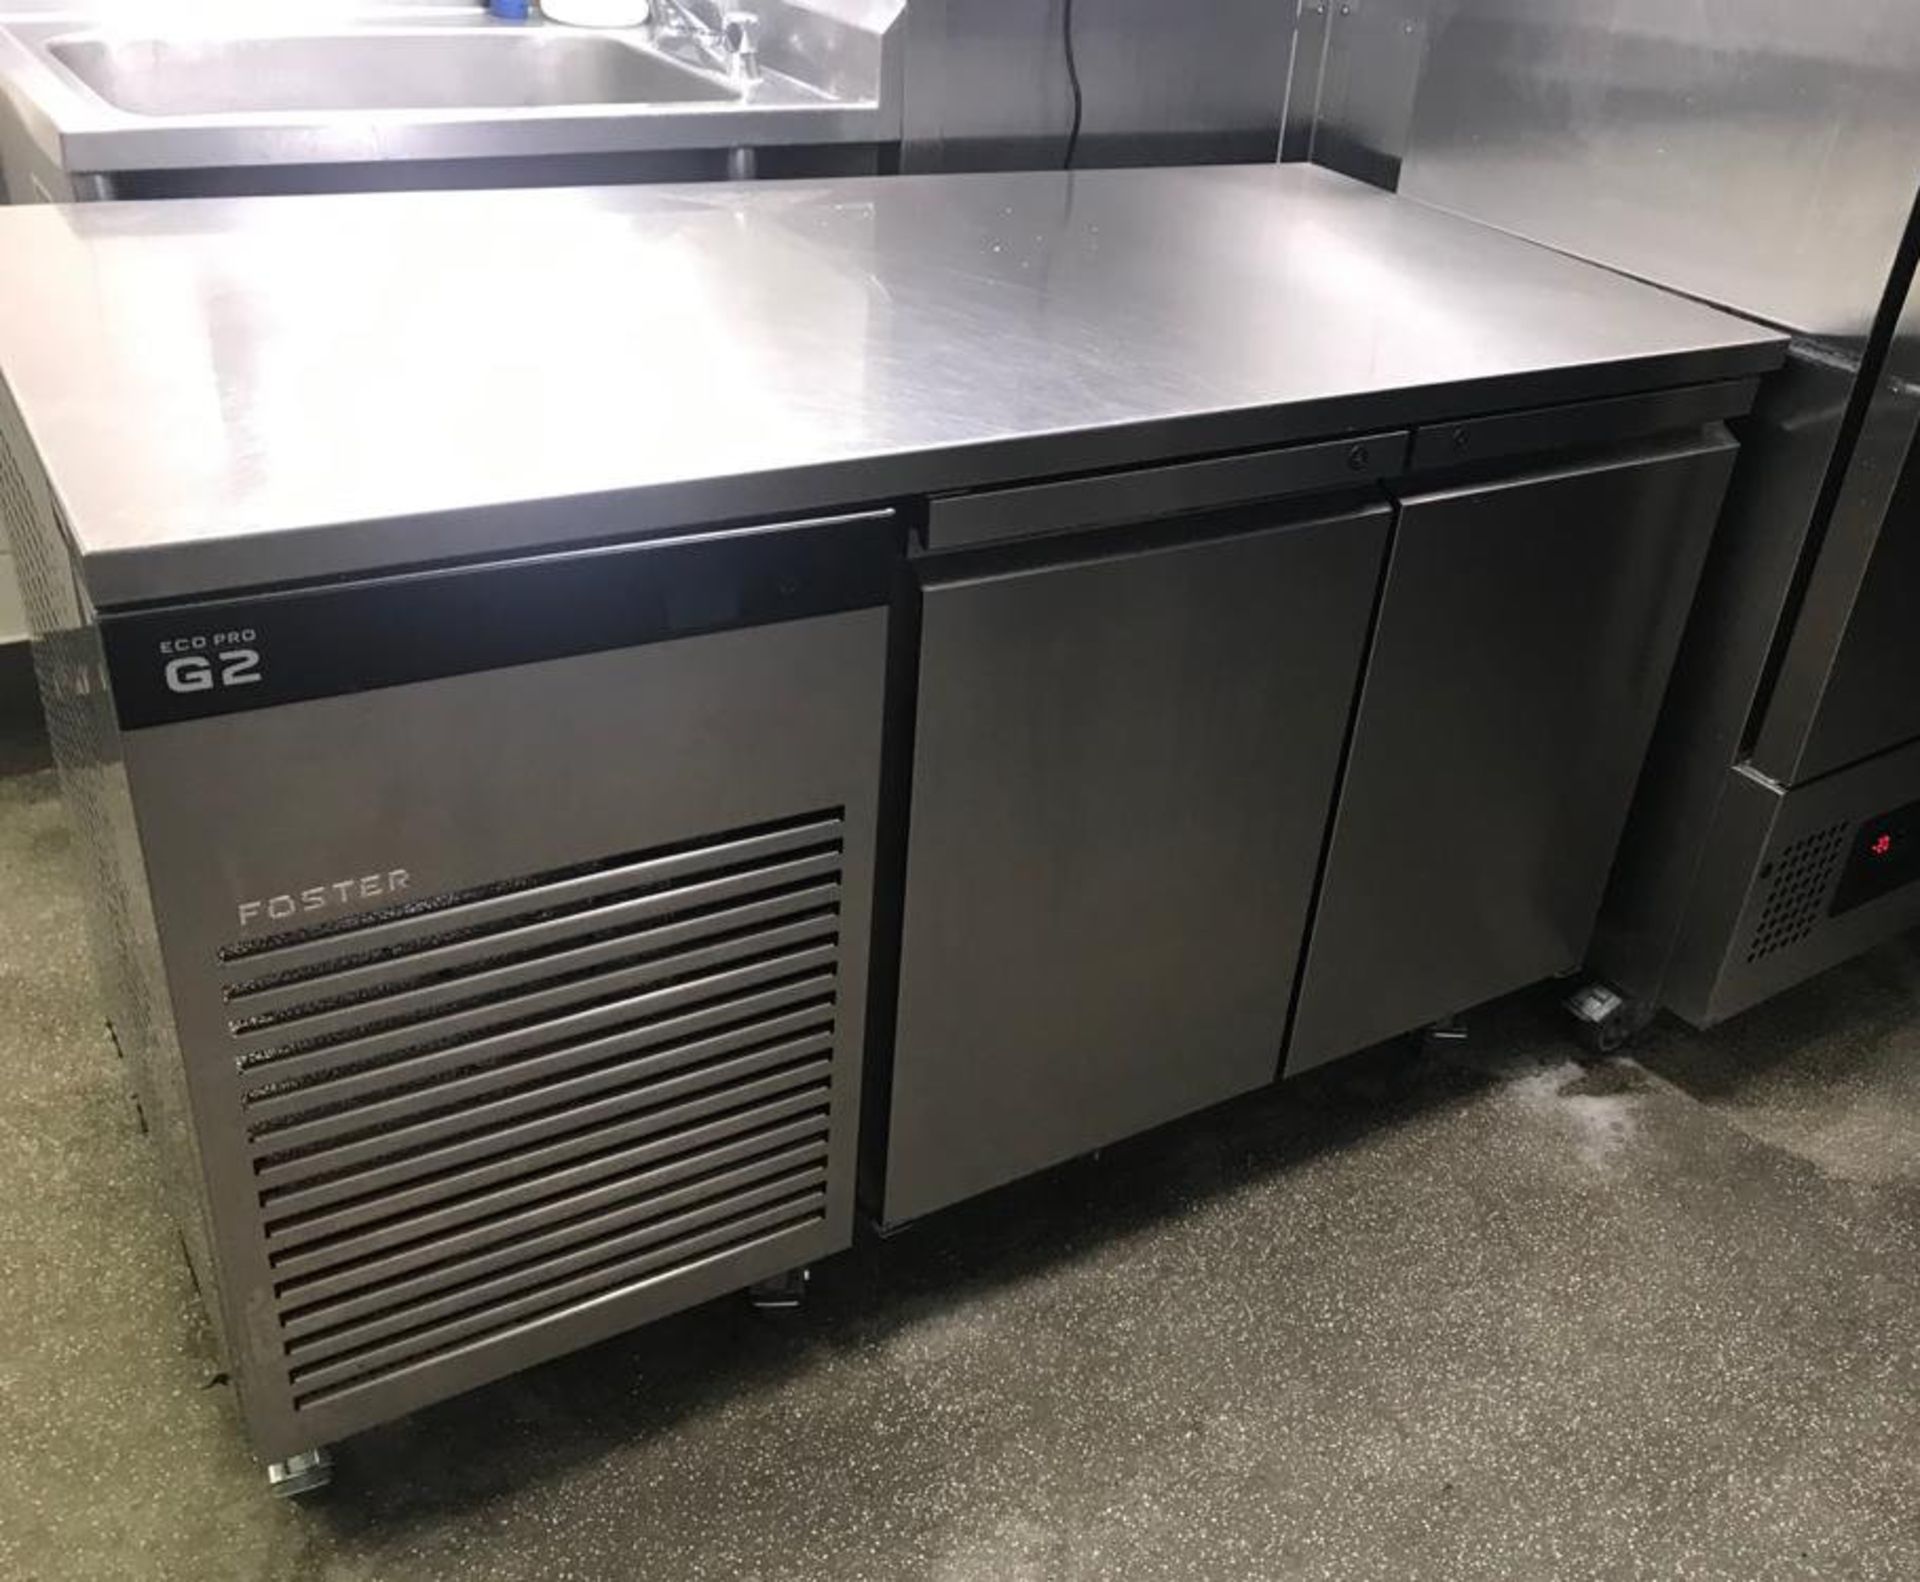 1 x Foster EcoPro G2 - Recently removed from London premises of a well-known restaurant chain -